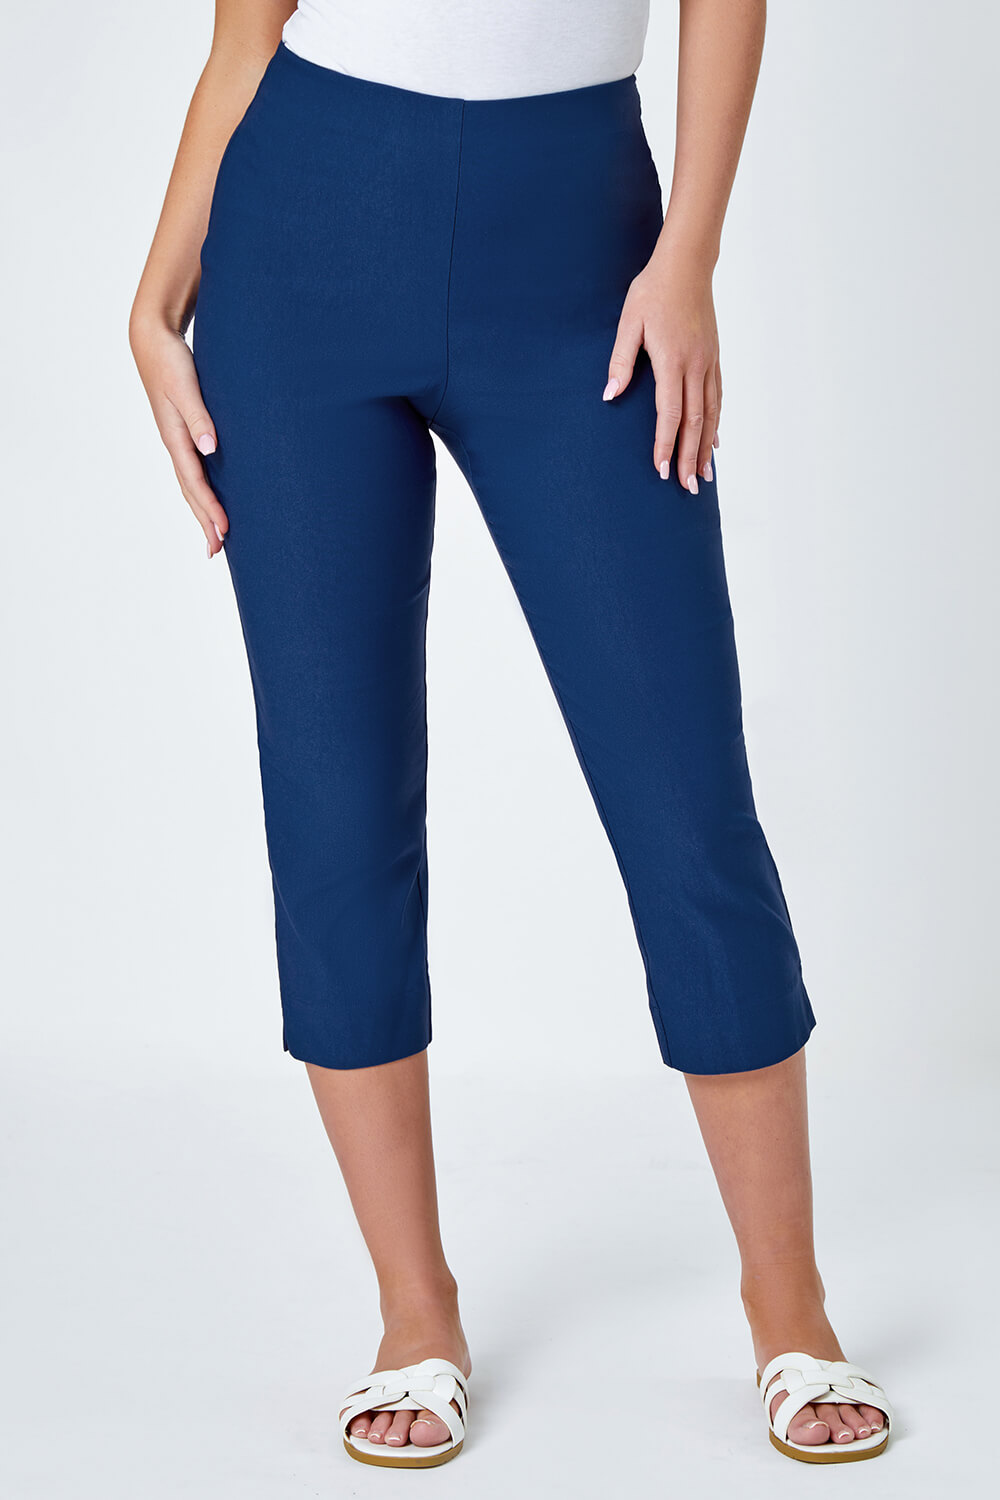 Midnight Blue Petite Cropped Stretch Trousers, Image 4 of 5